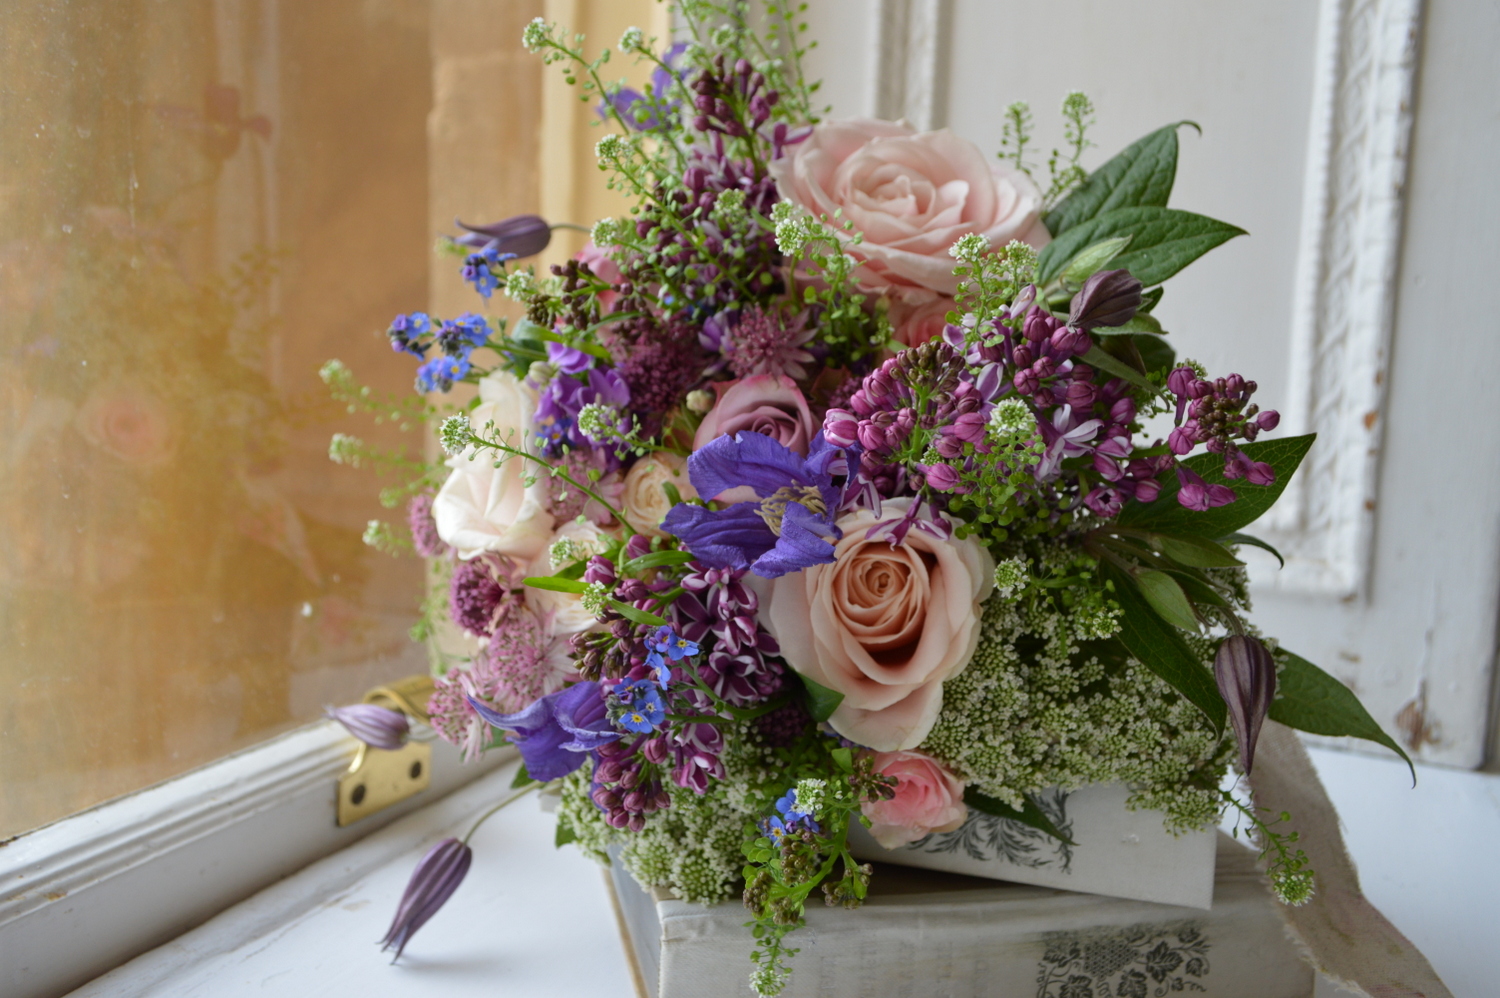 Romantic Wedding Bouquet with Lilac, Roses, Ammi & Clematis.